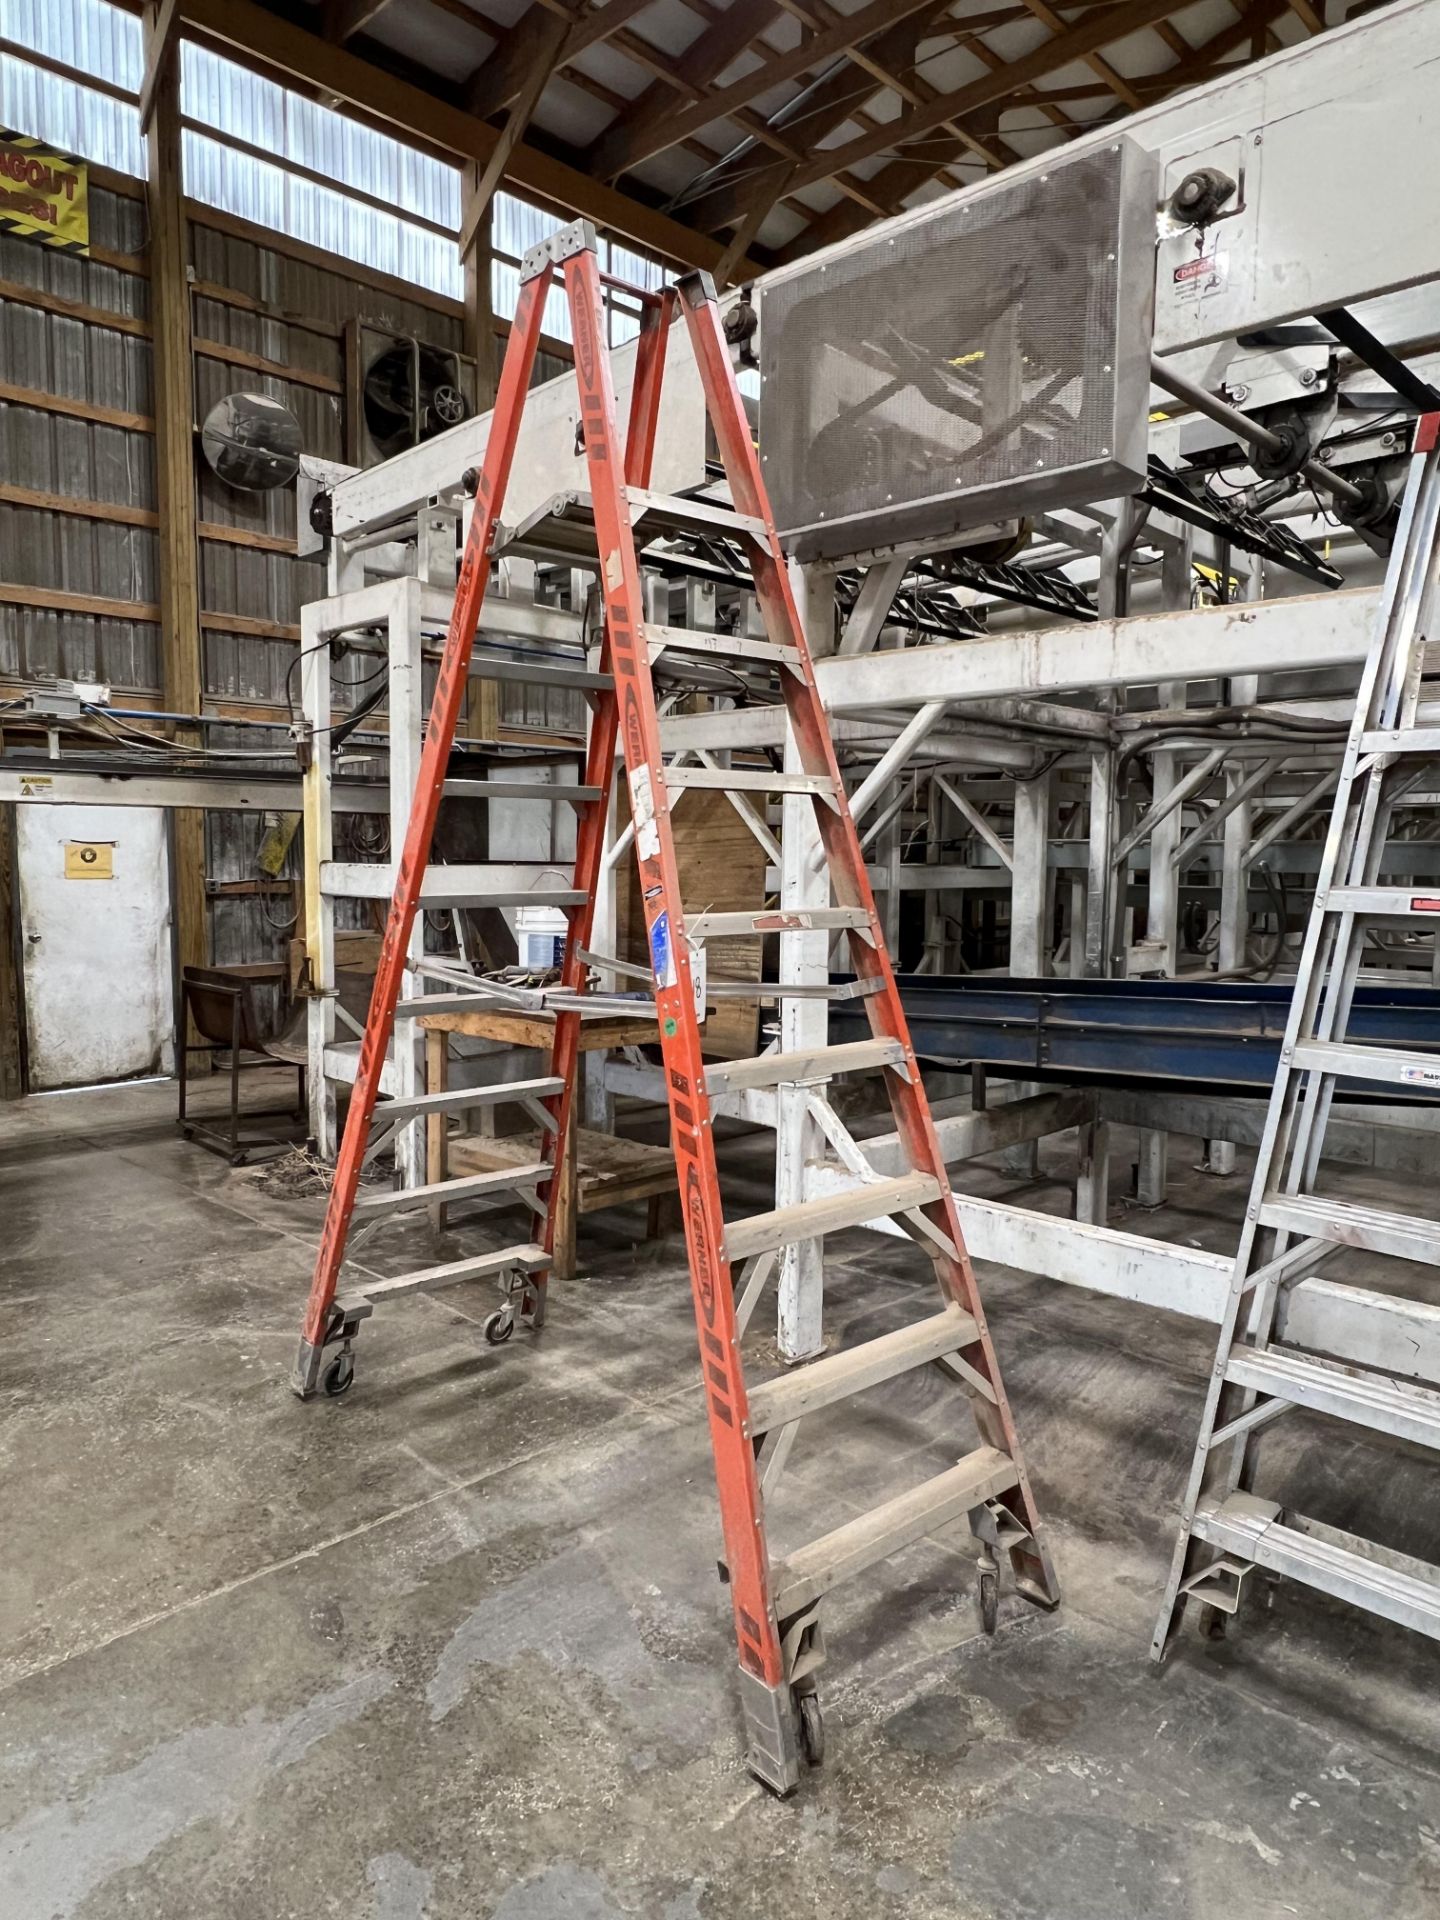 Lot of Ladders